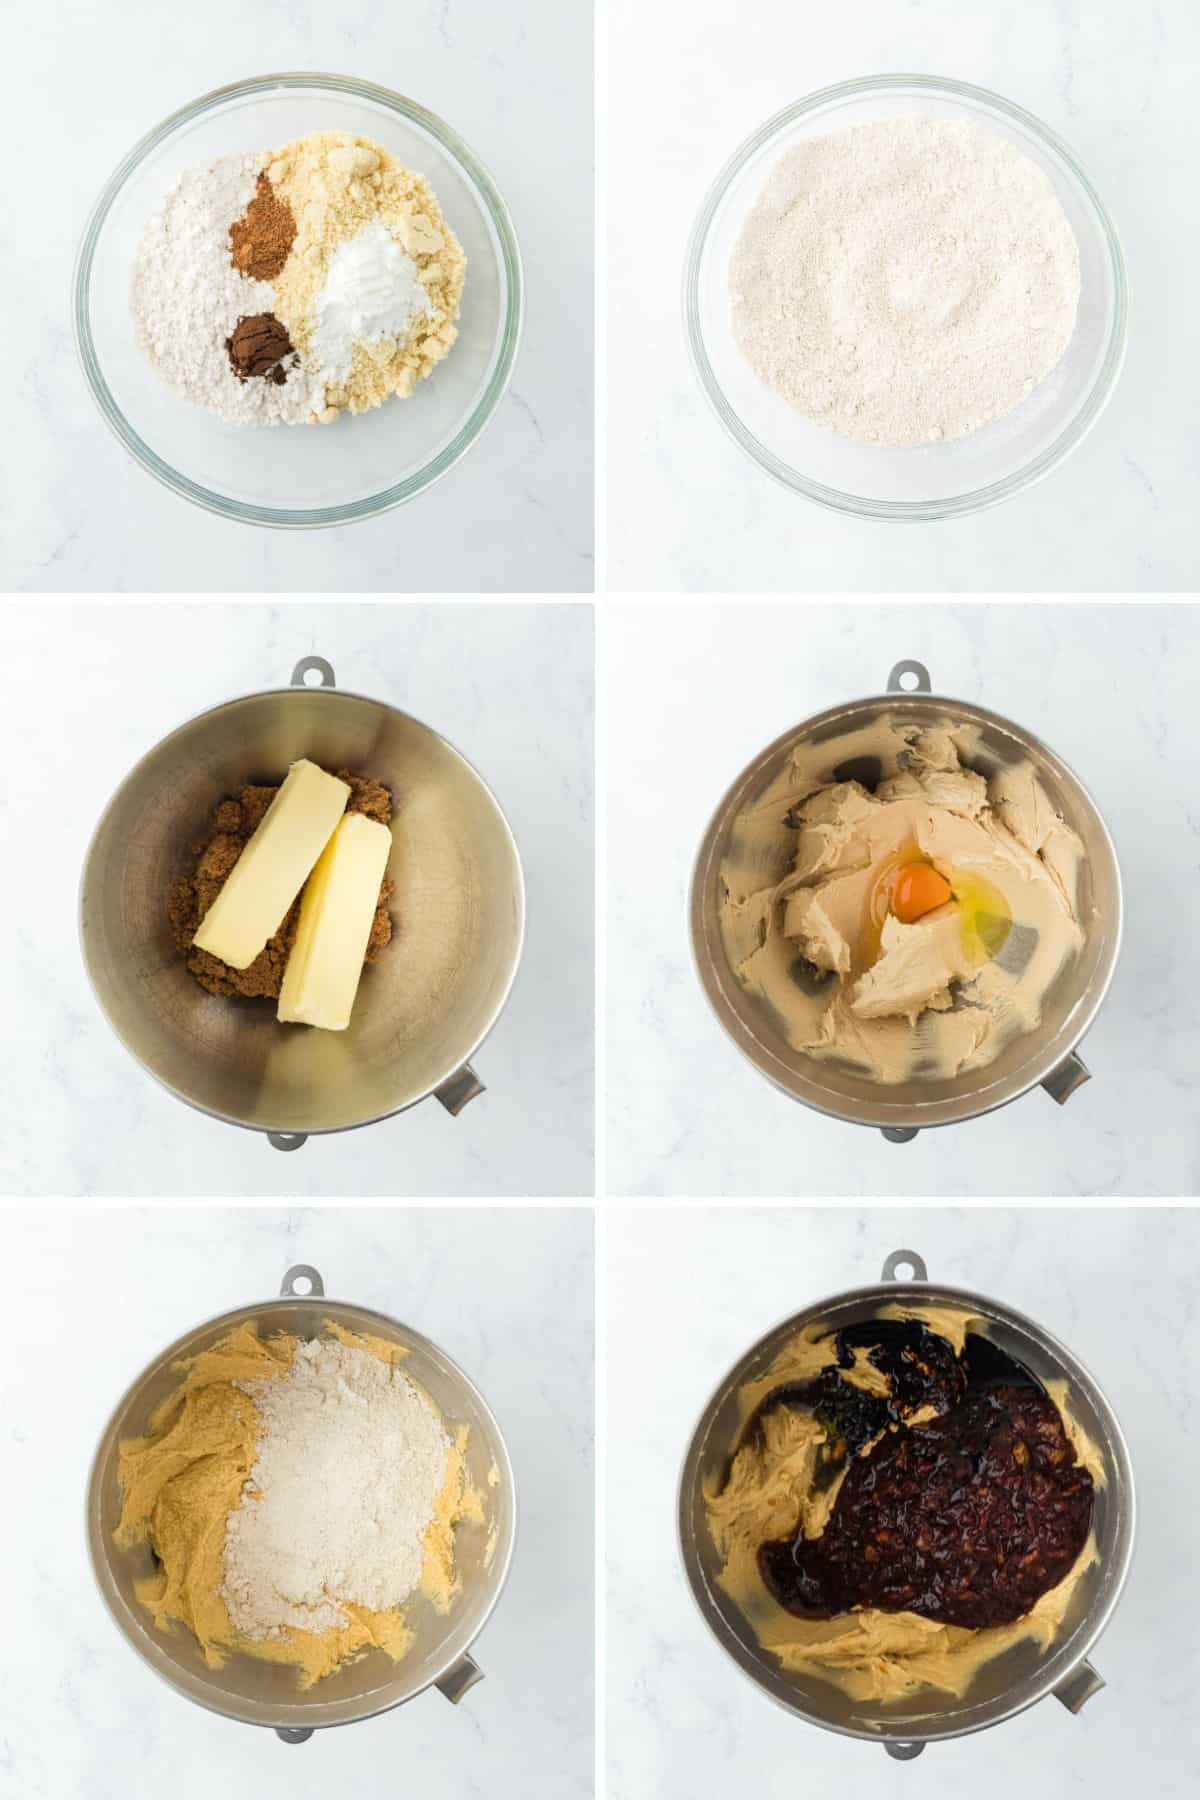 A step by step image collage on how to make Jamaican black cake with mixing the dry ingredients, craming the butter with the sugar, adding the eggs, adding the dry mixture, and pouring the rest of the ingredients including the fruit mixture